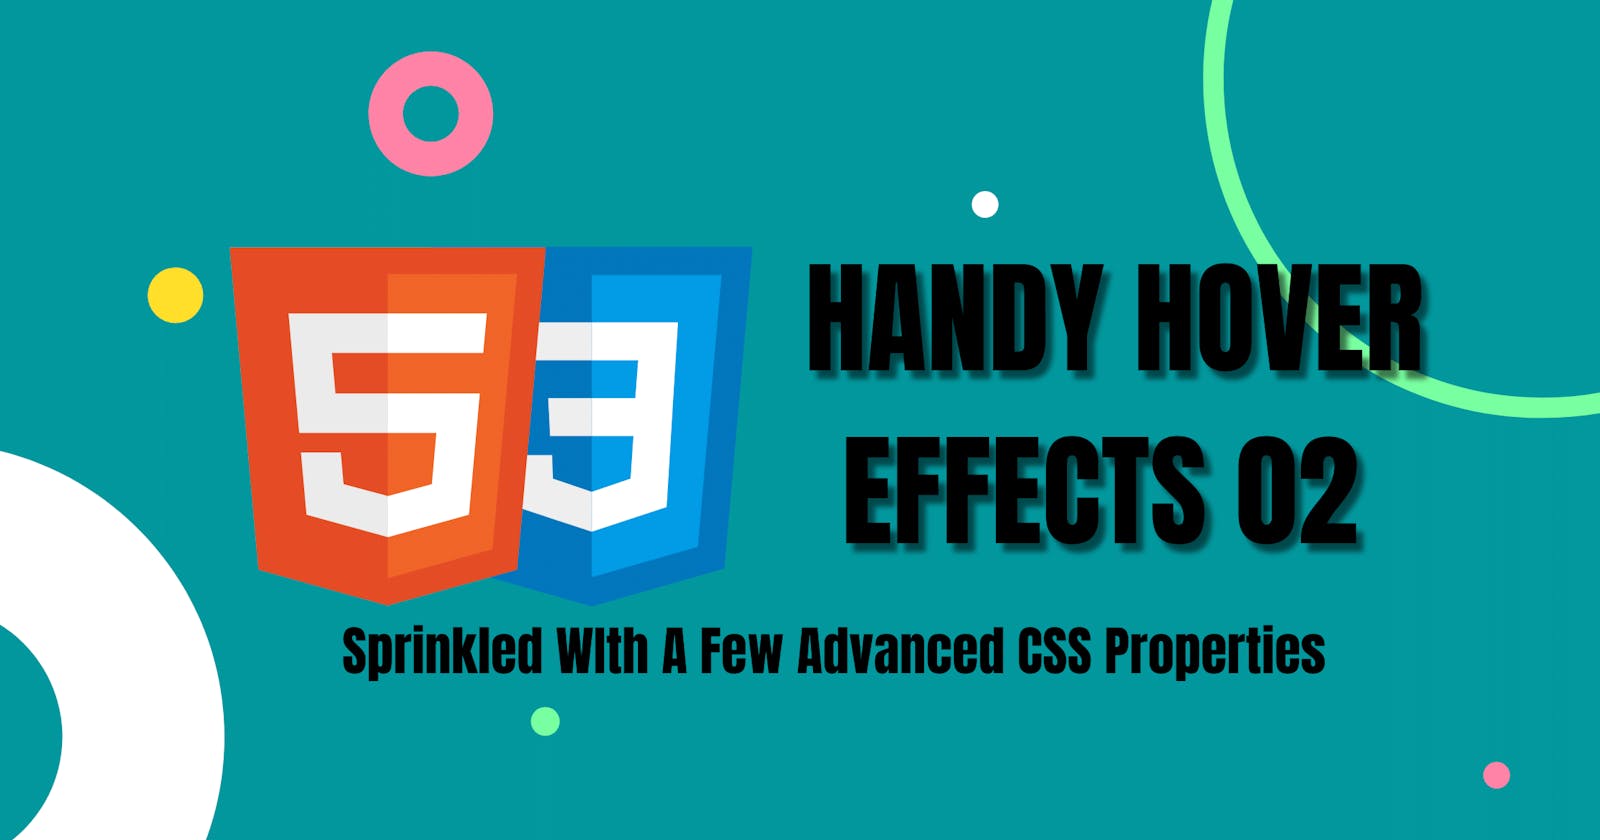 Handy Hover Effects: 02